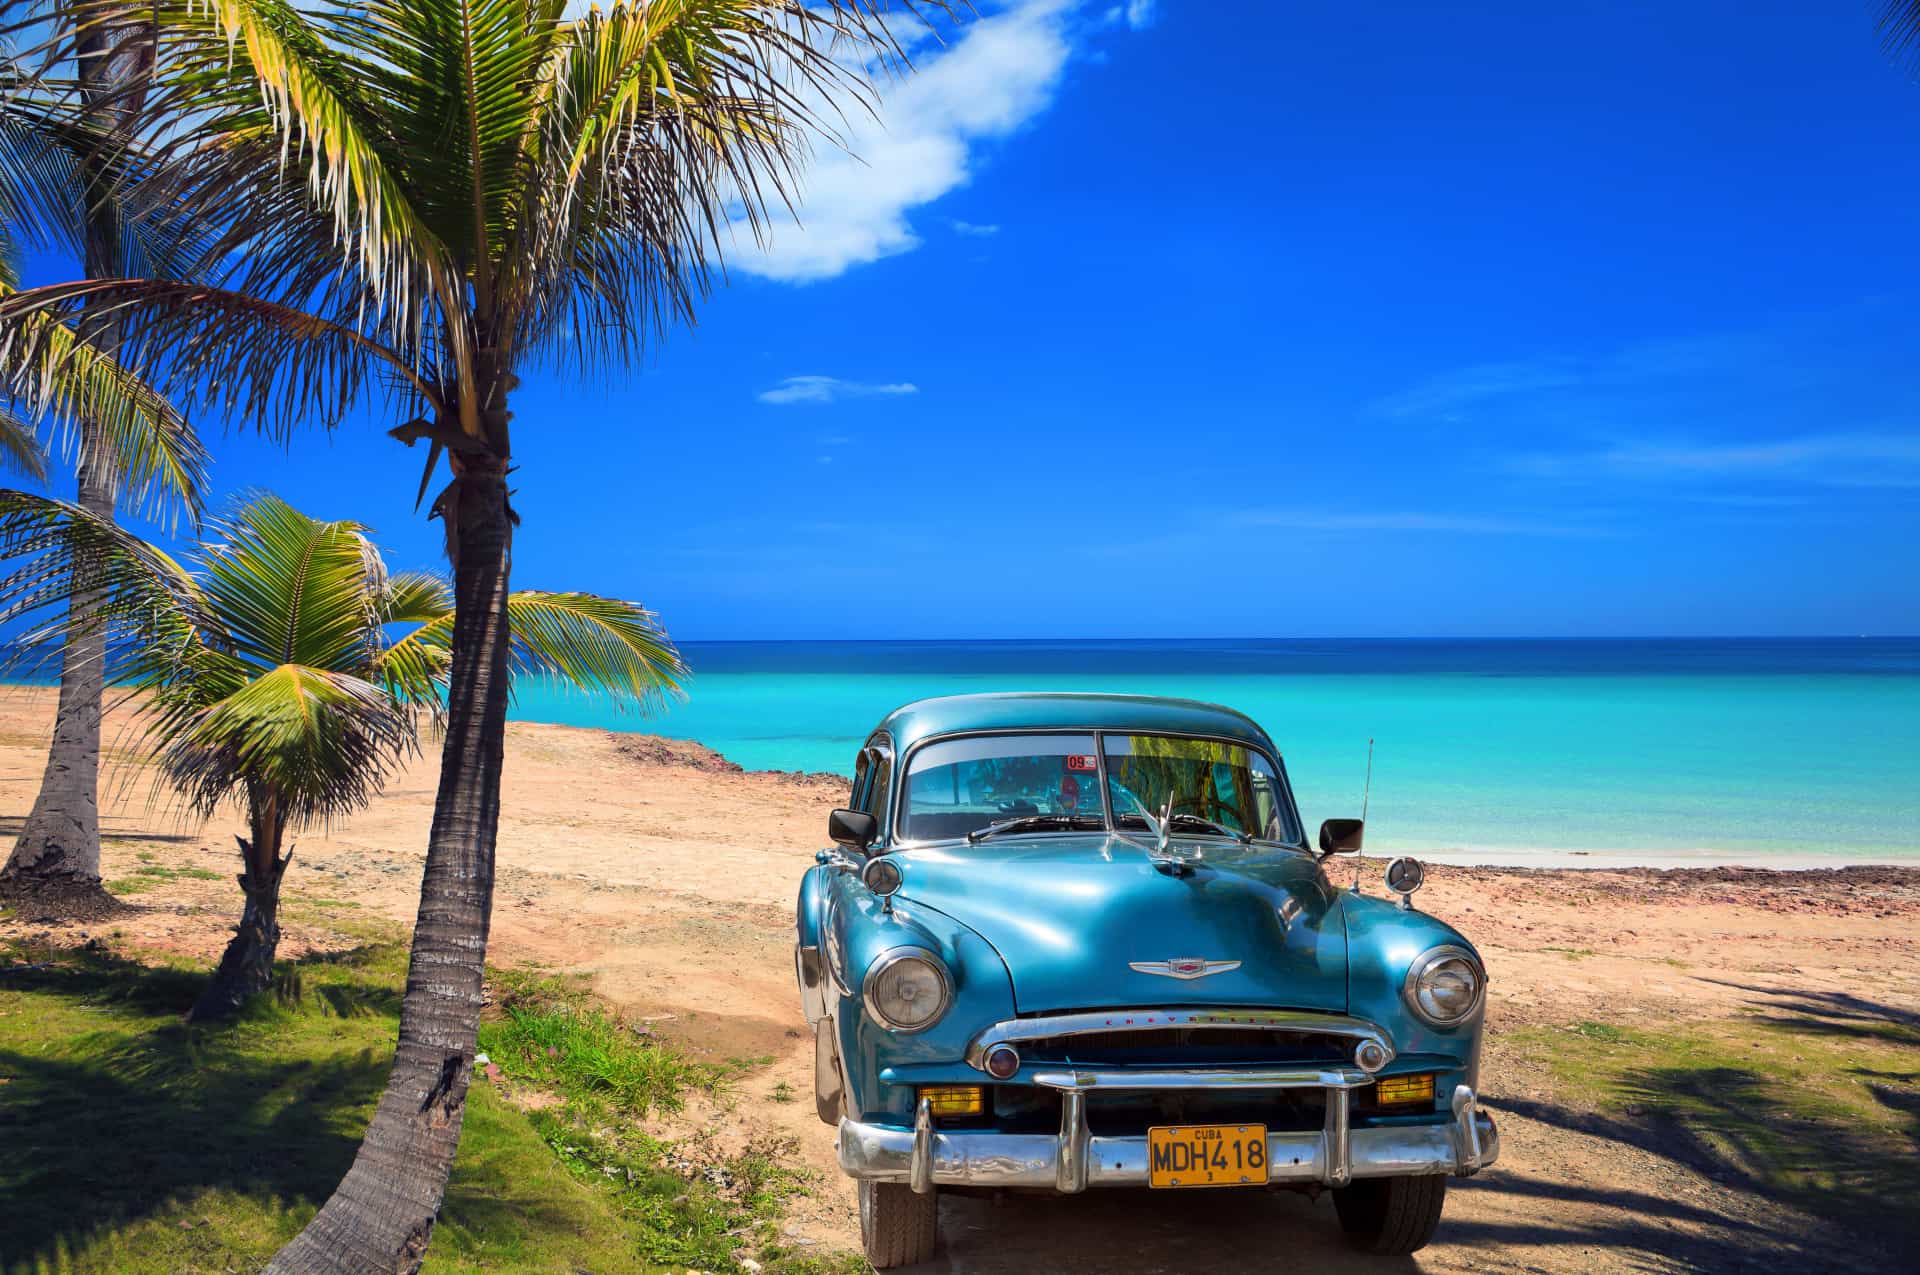 It is not hard to find vintage cars in Cuba. Models ranging from the 1940s to the 1960s can be seen on almost every city street. Click on the gallery and check out the coolest models on the island!